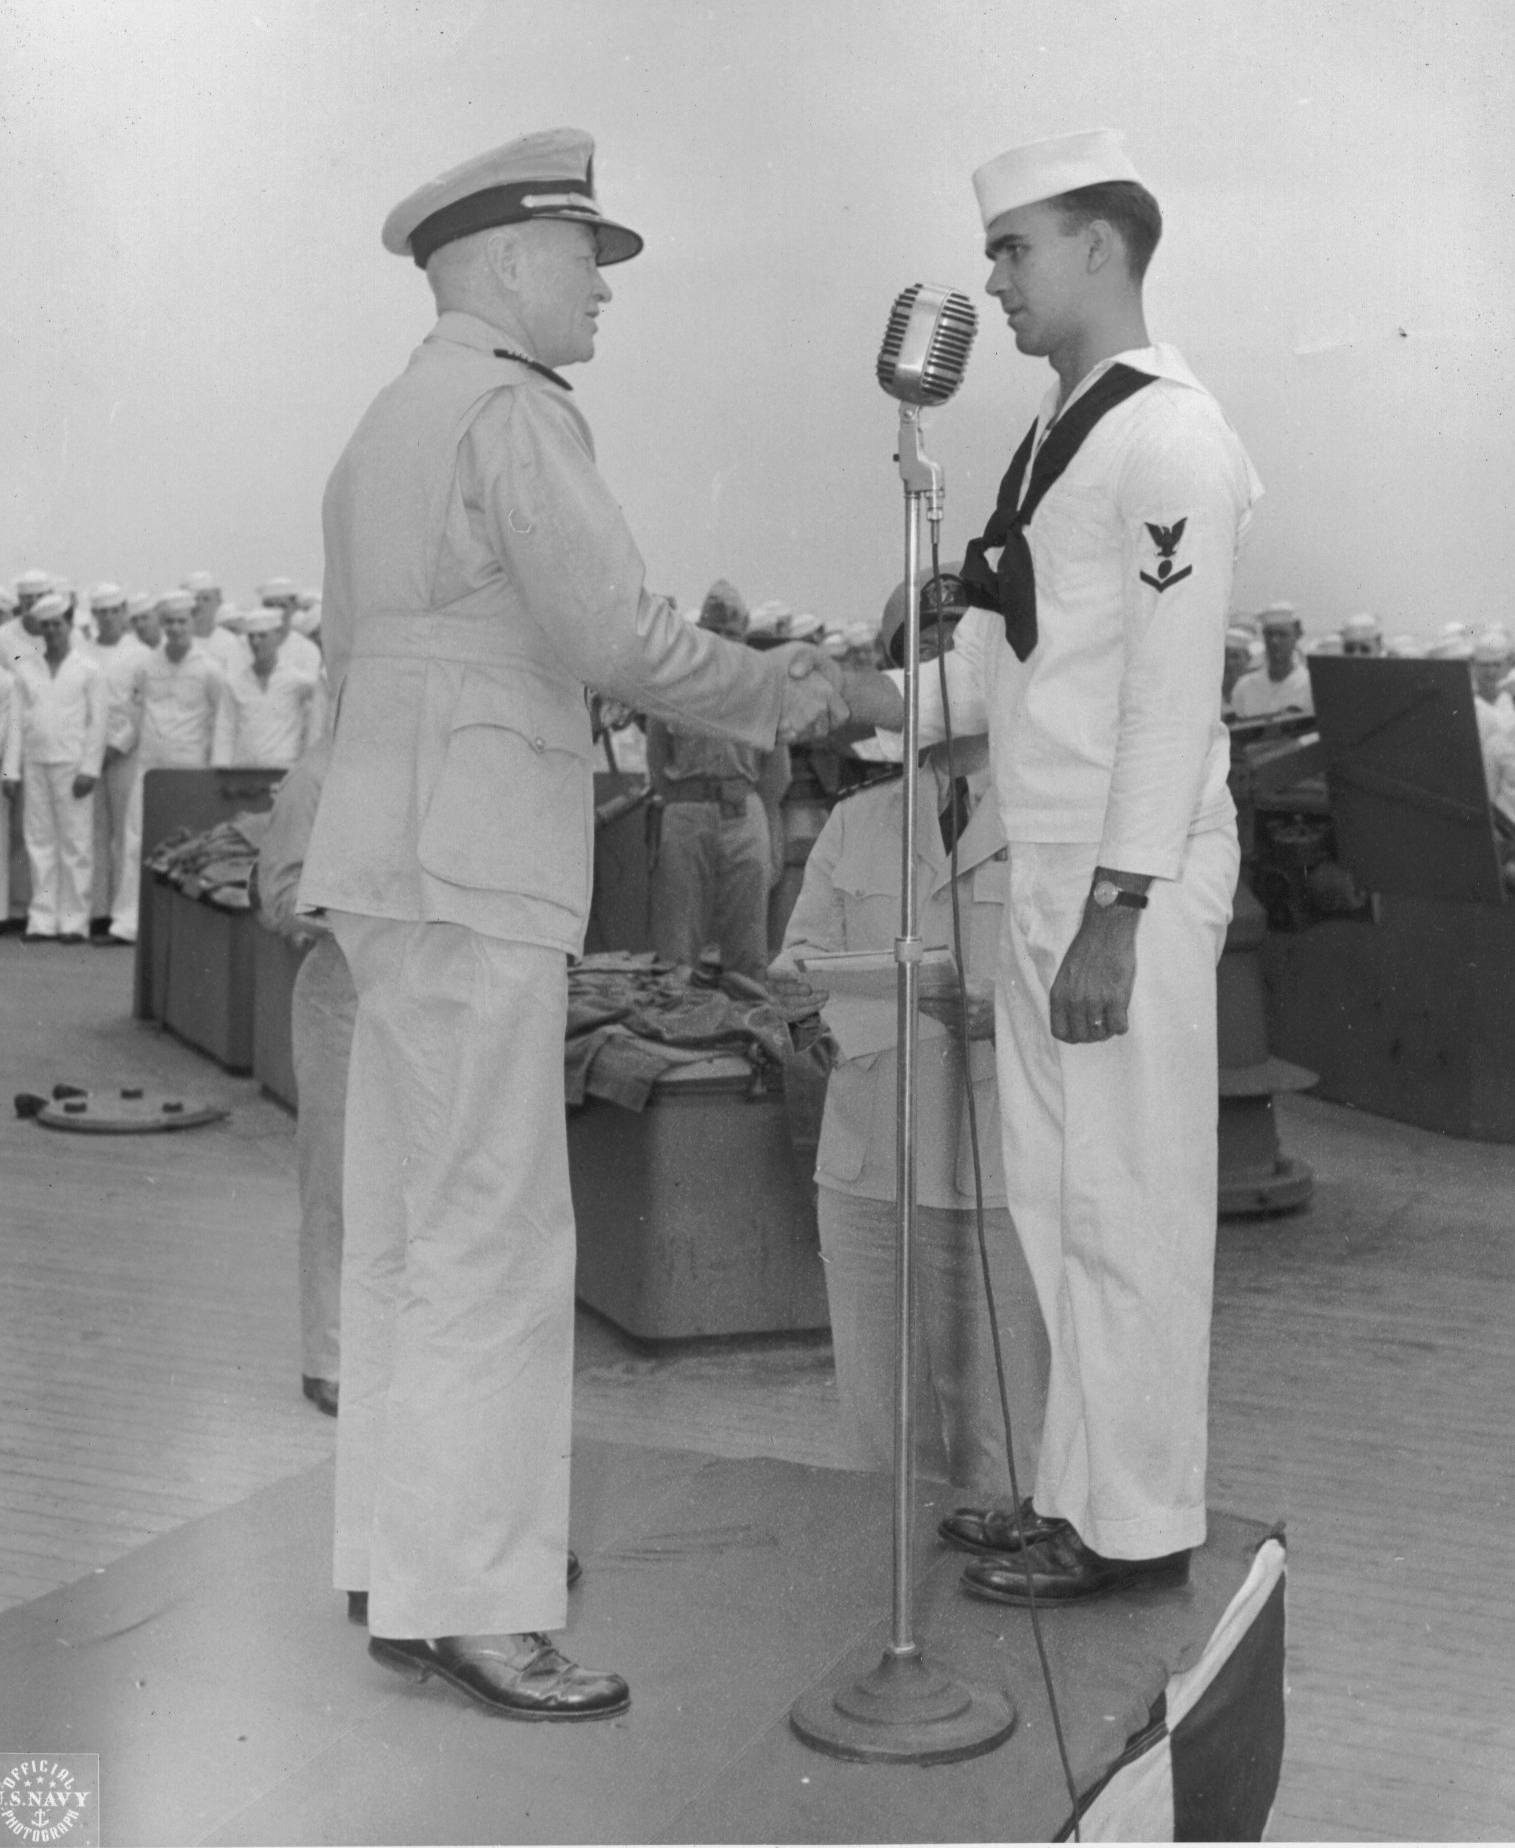 Captain Carl Holden at an award ceremony aboard USS New Jersey, 24 Jul 1943, photo 2 of 2